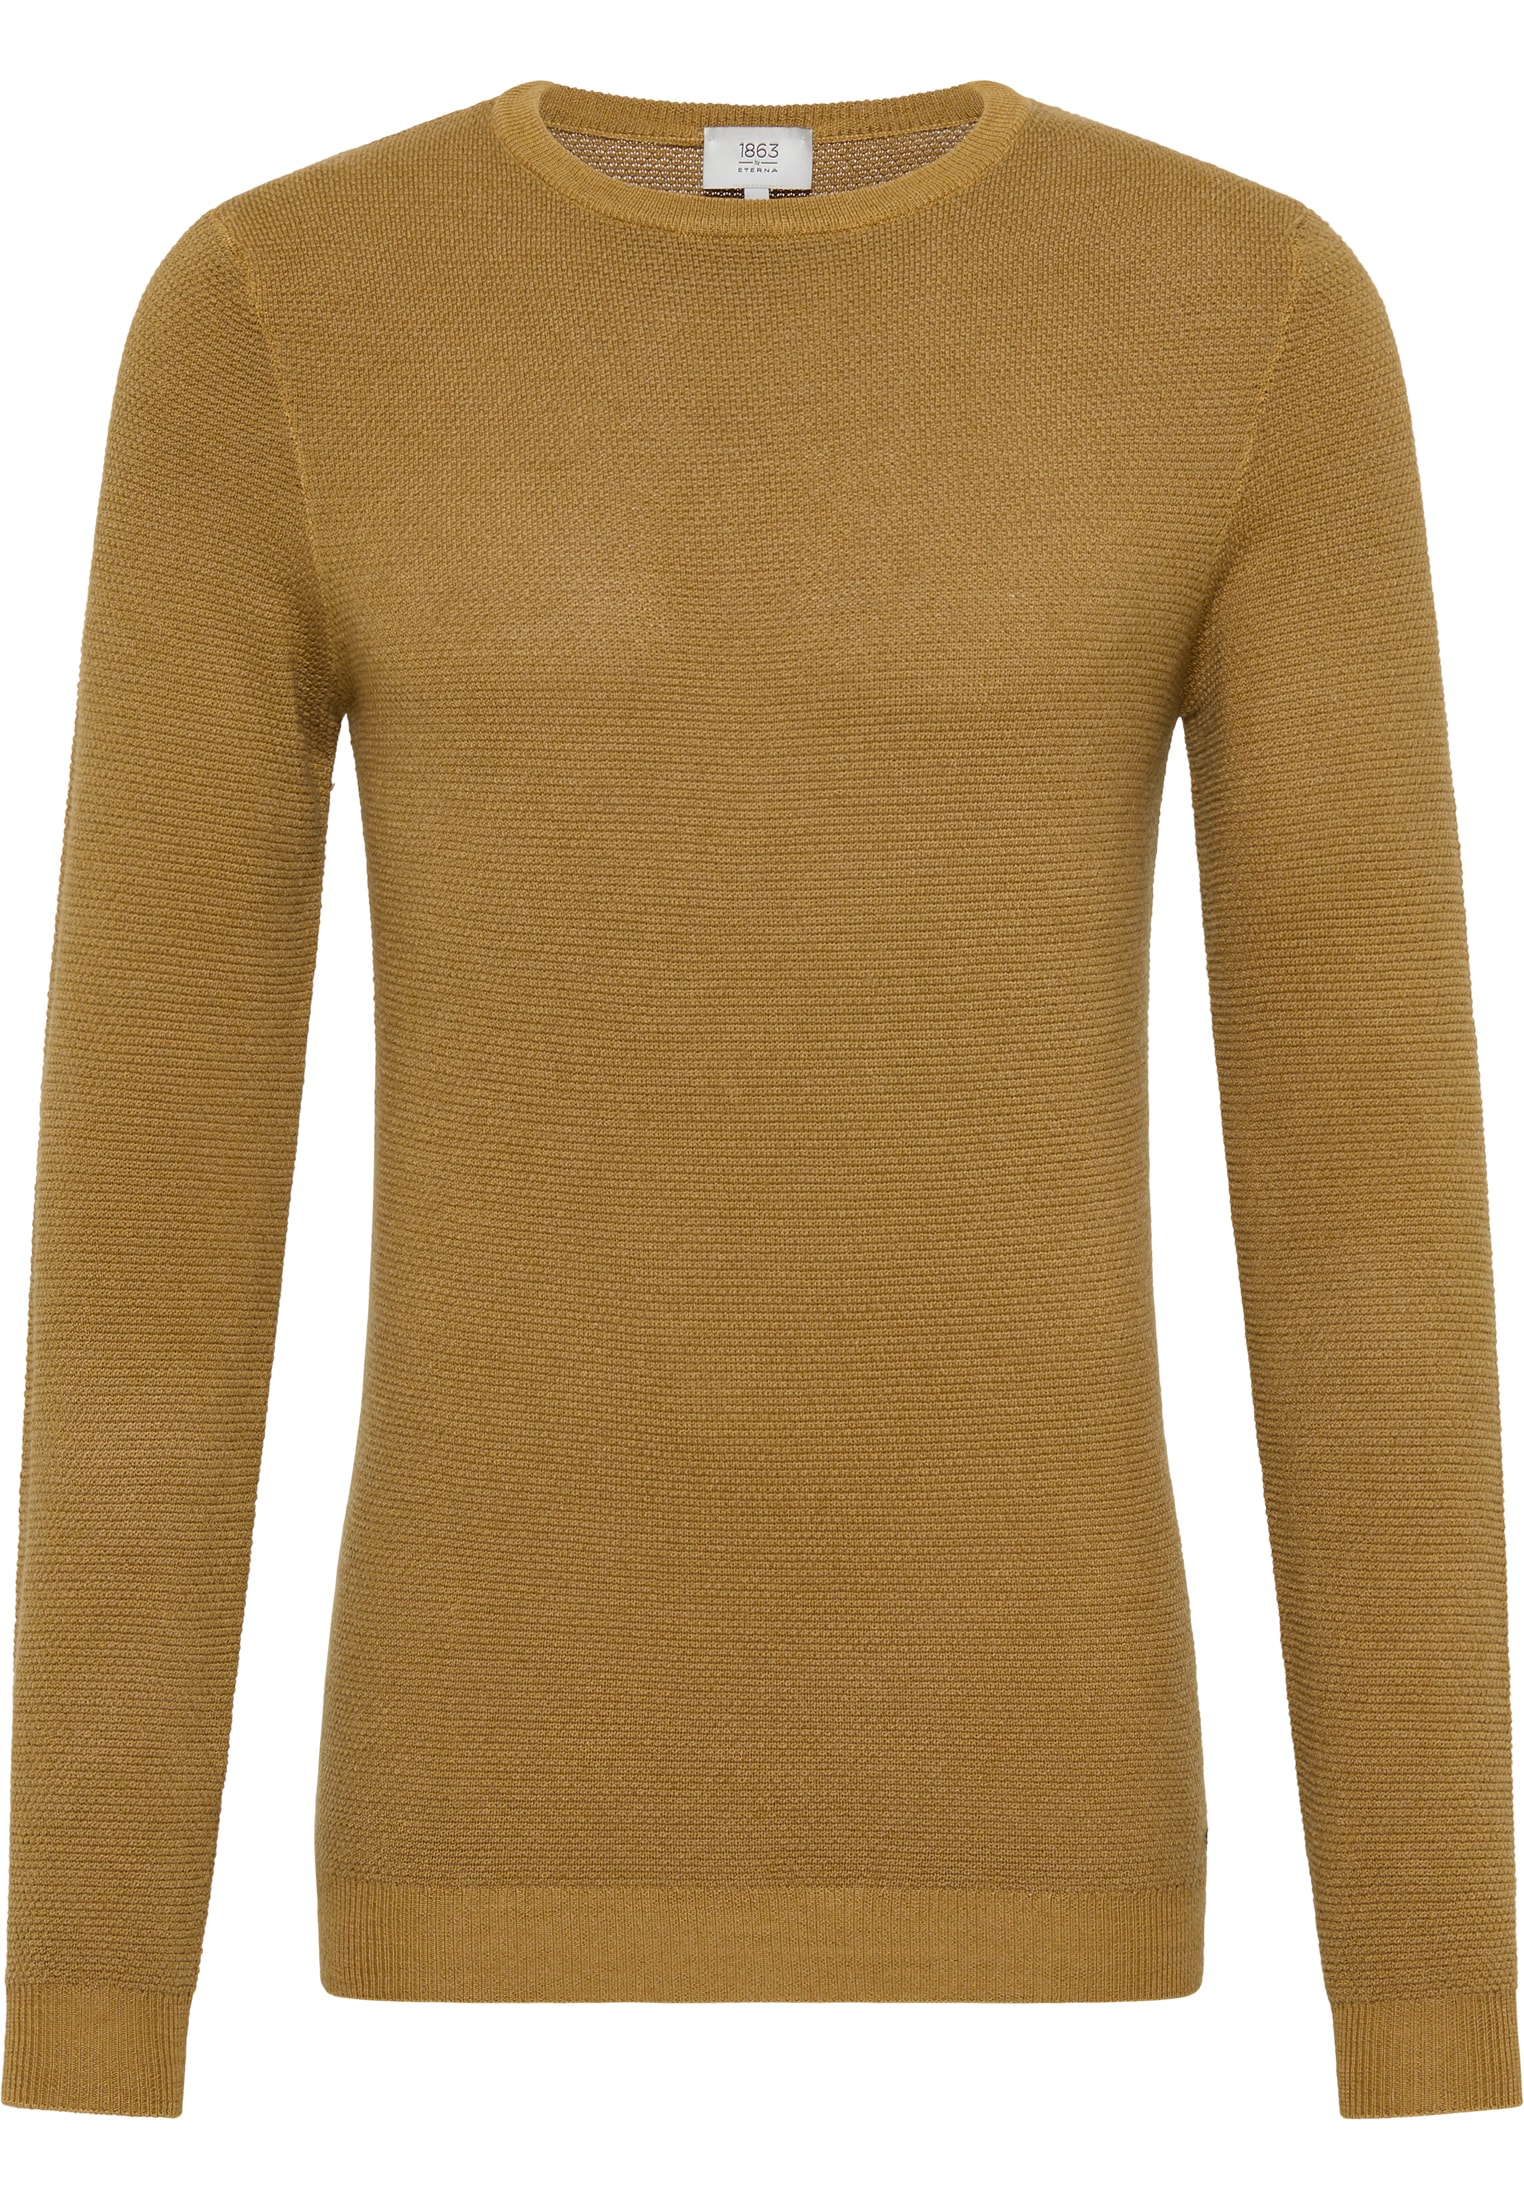 Pull en tricot curry uni